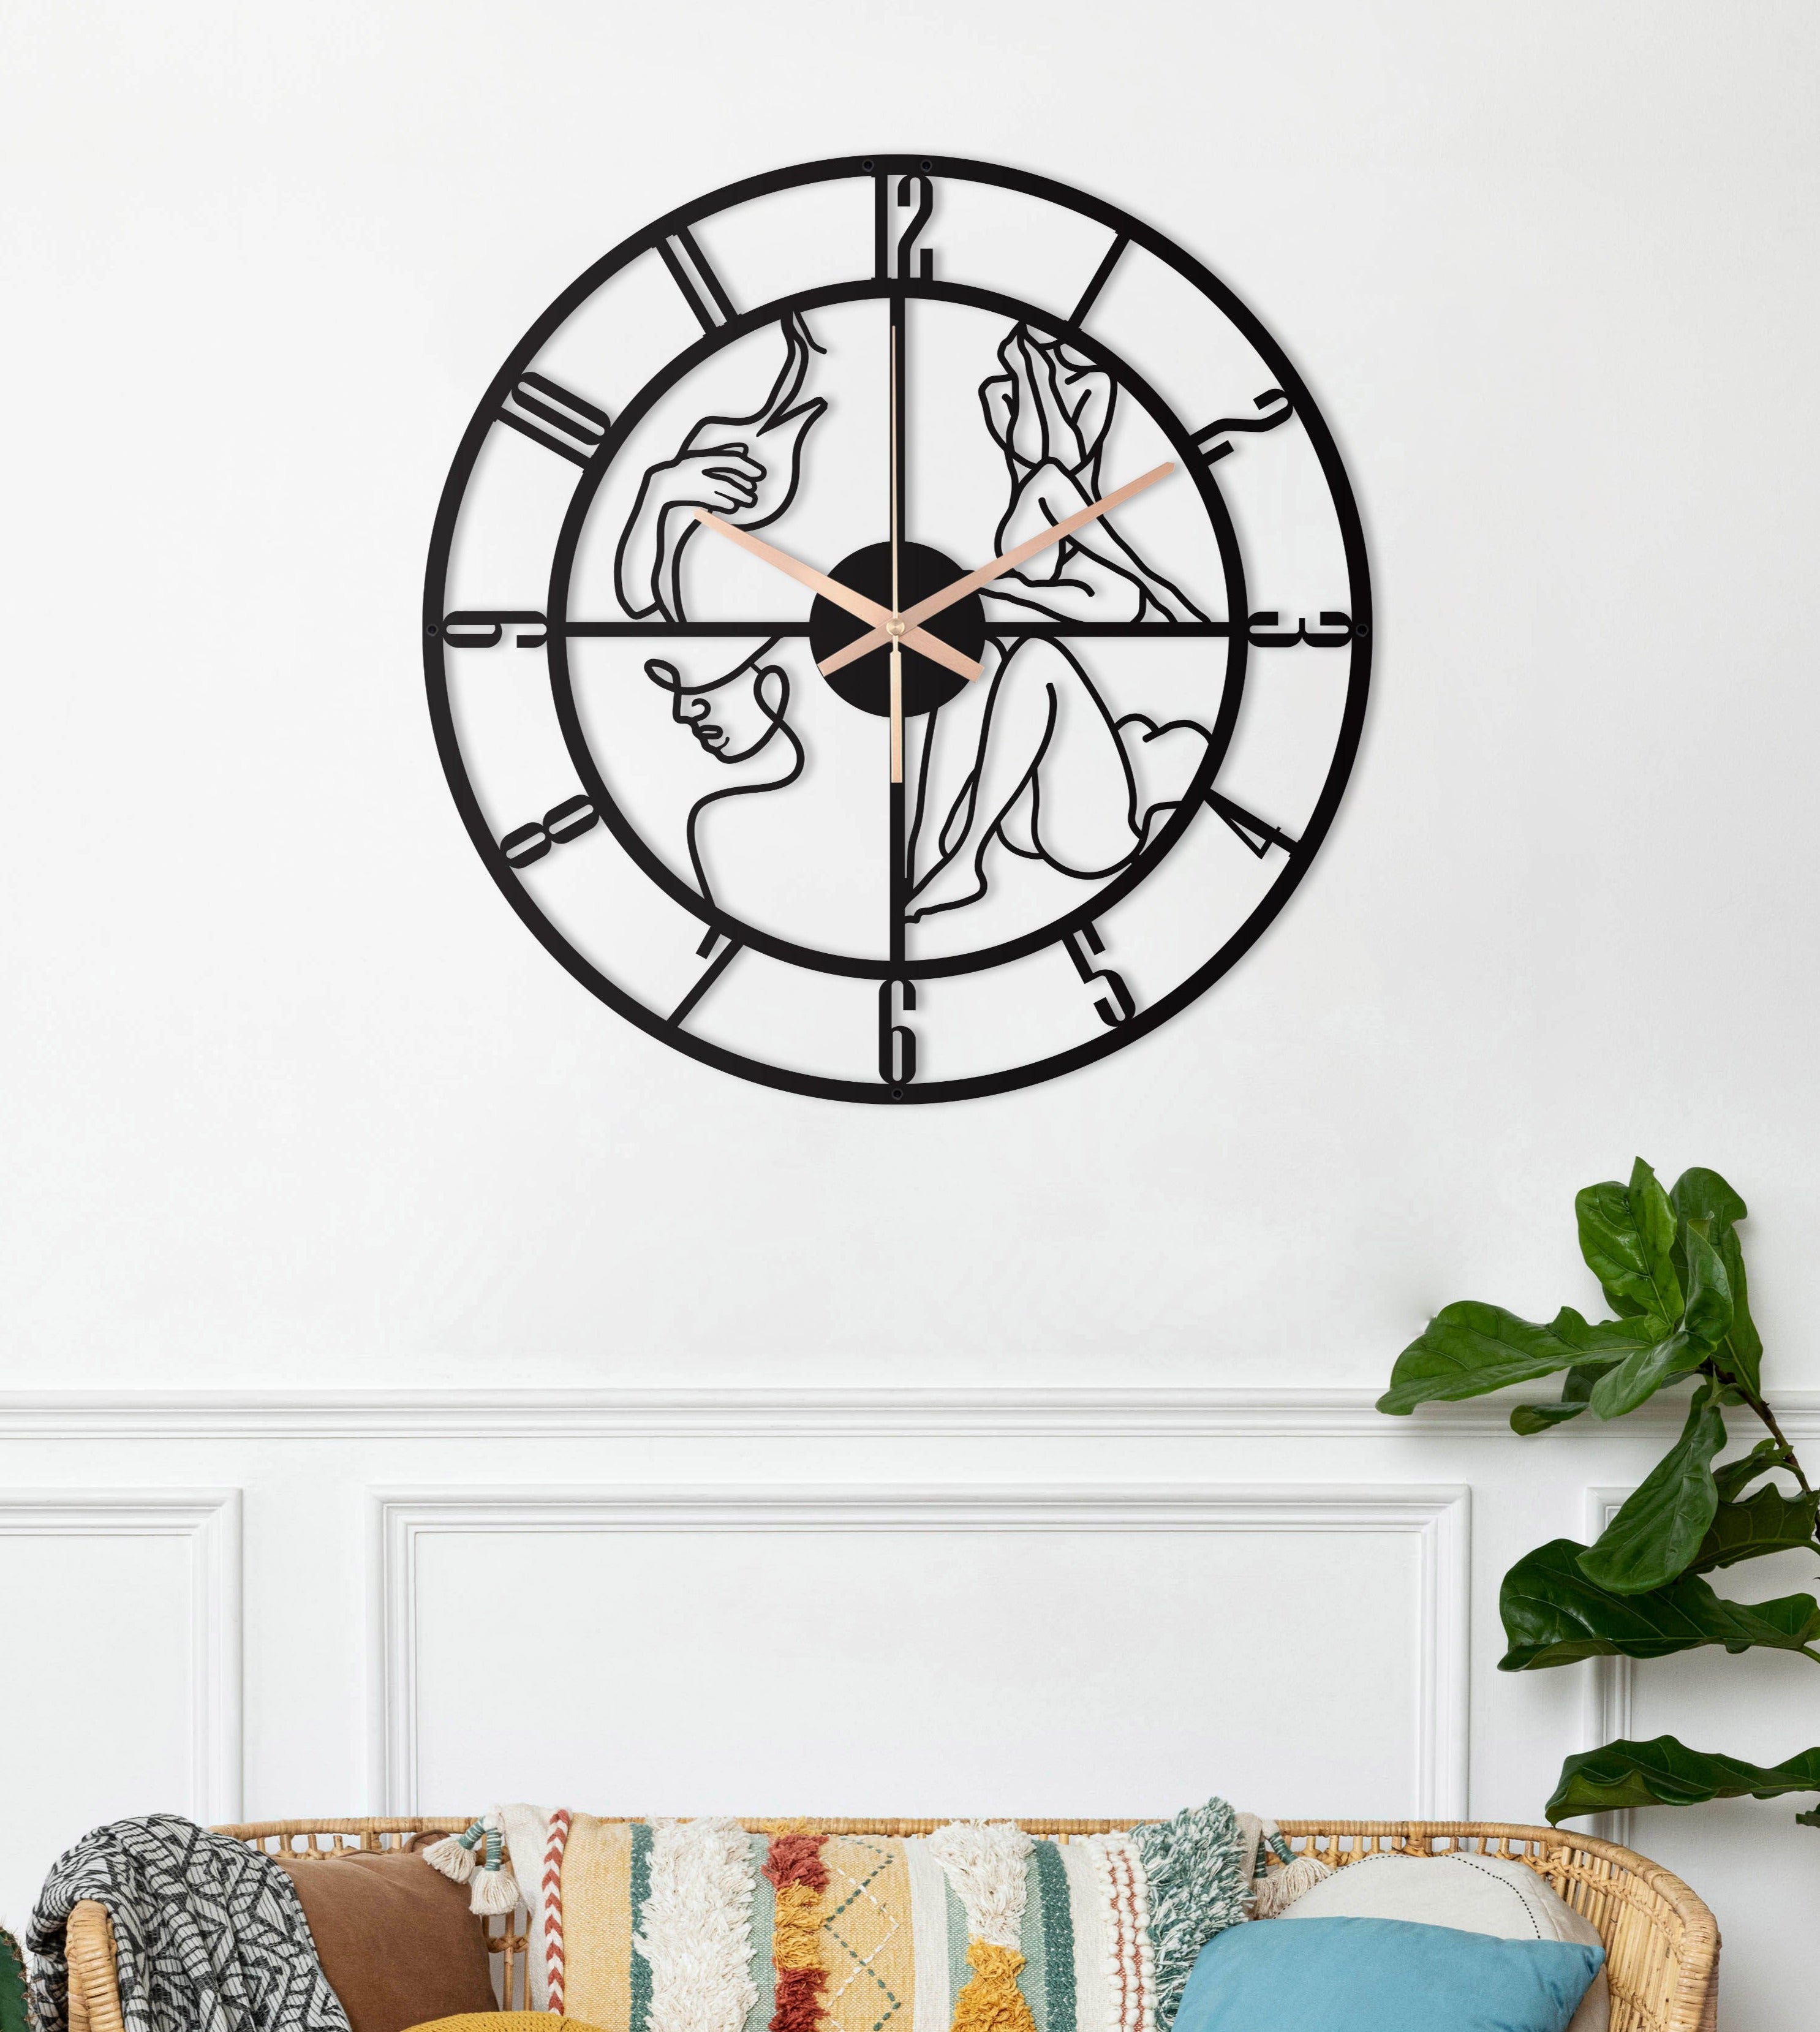 Woman Wall Clock With Numbers